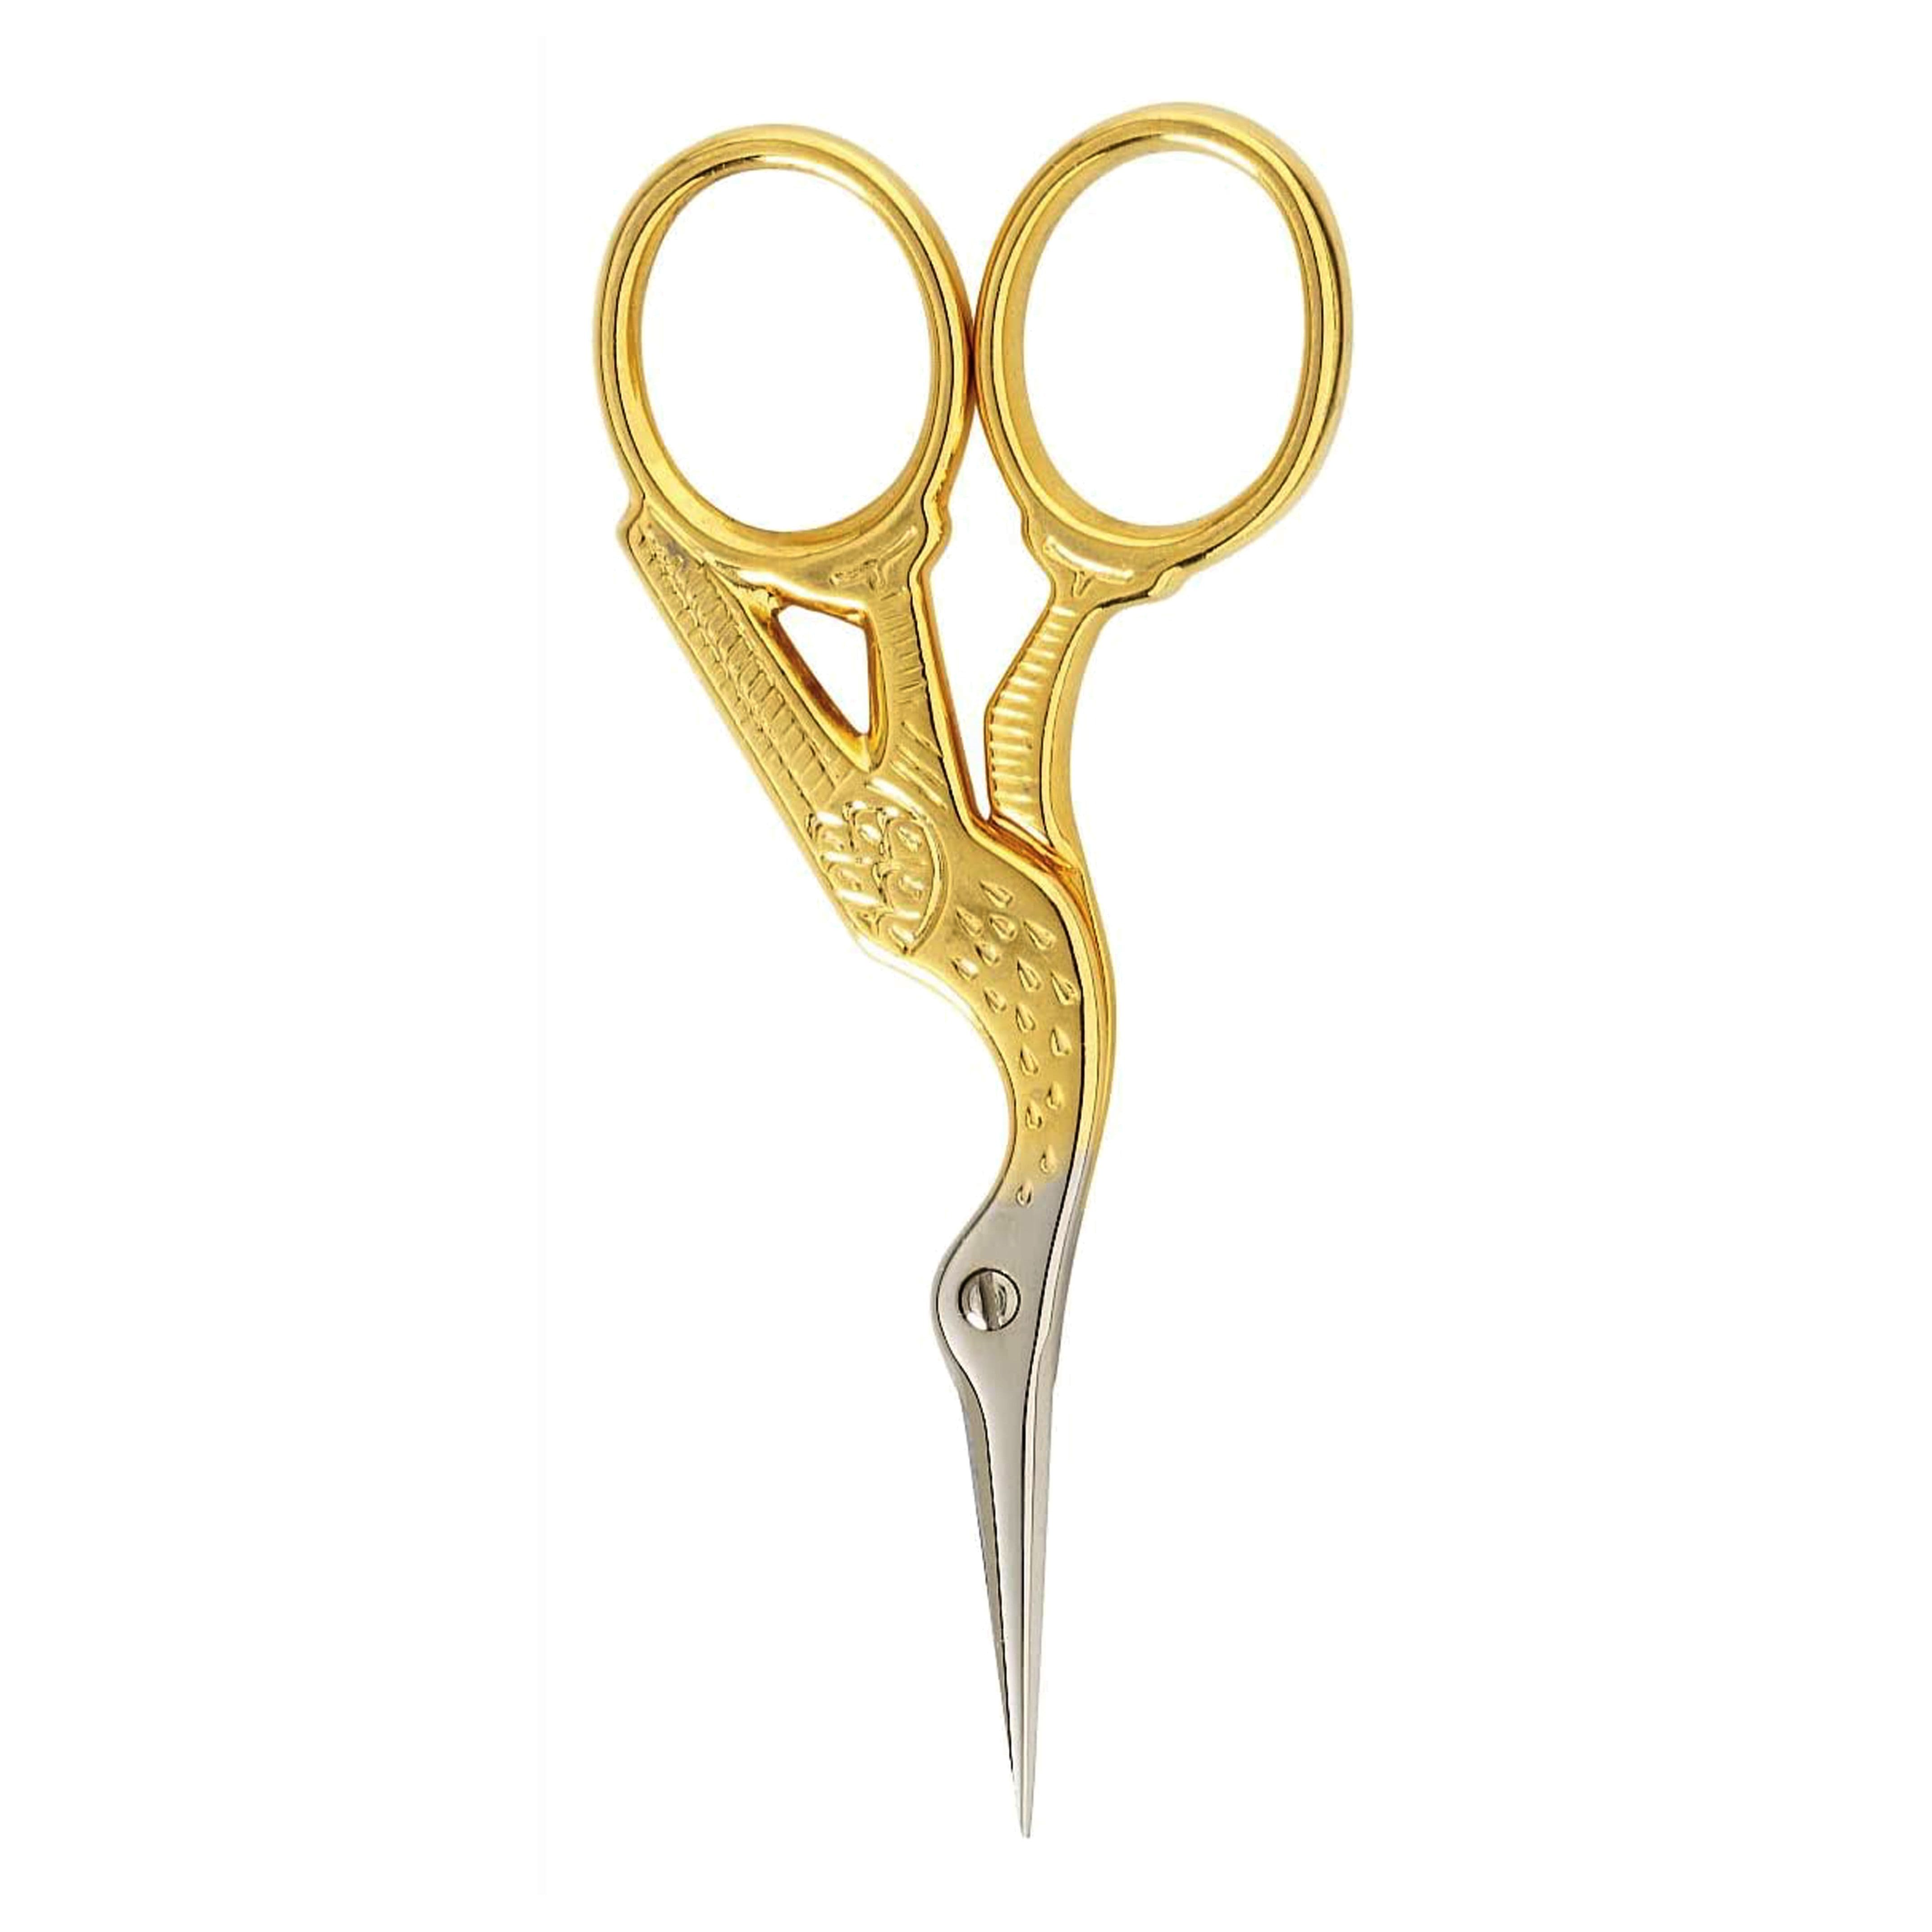 Gingher Gold-Handled Stork Embroidery Scissors 3.5 - W/Leather Sheath -  3527489